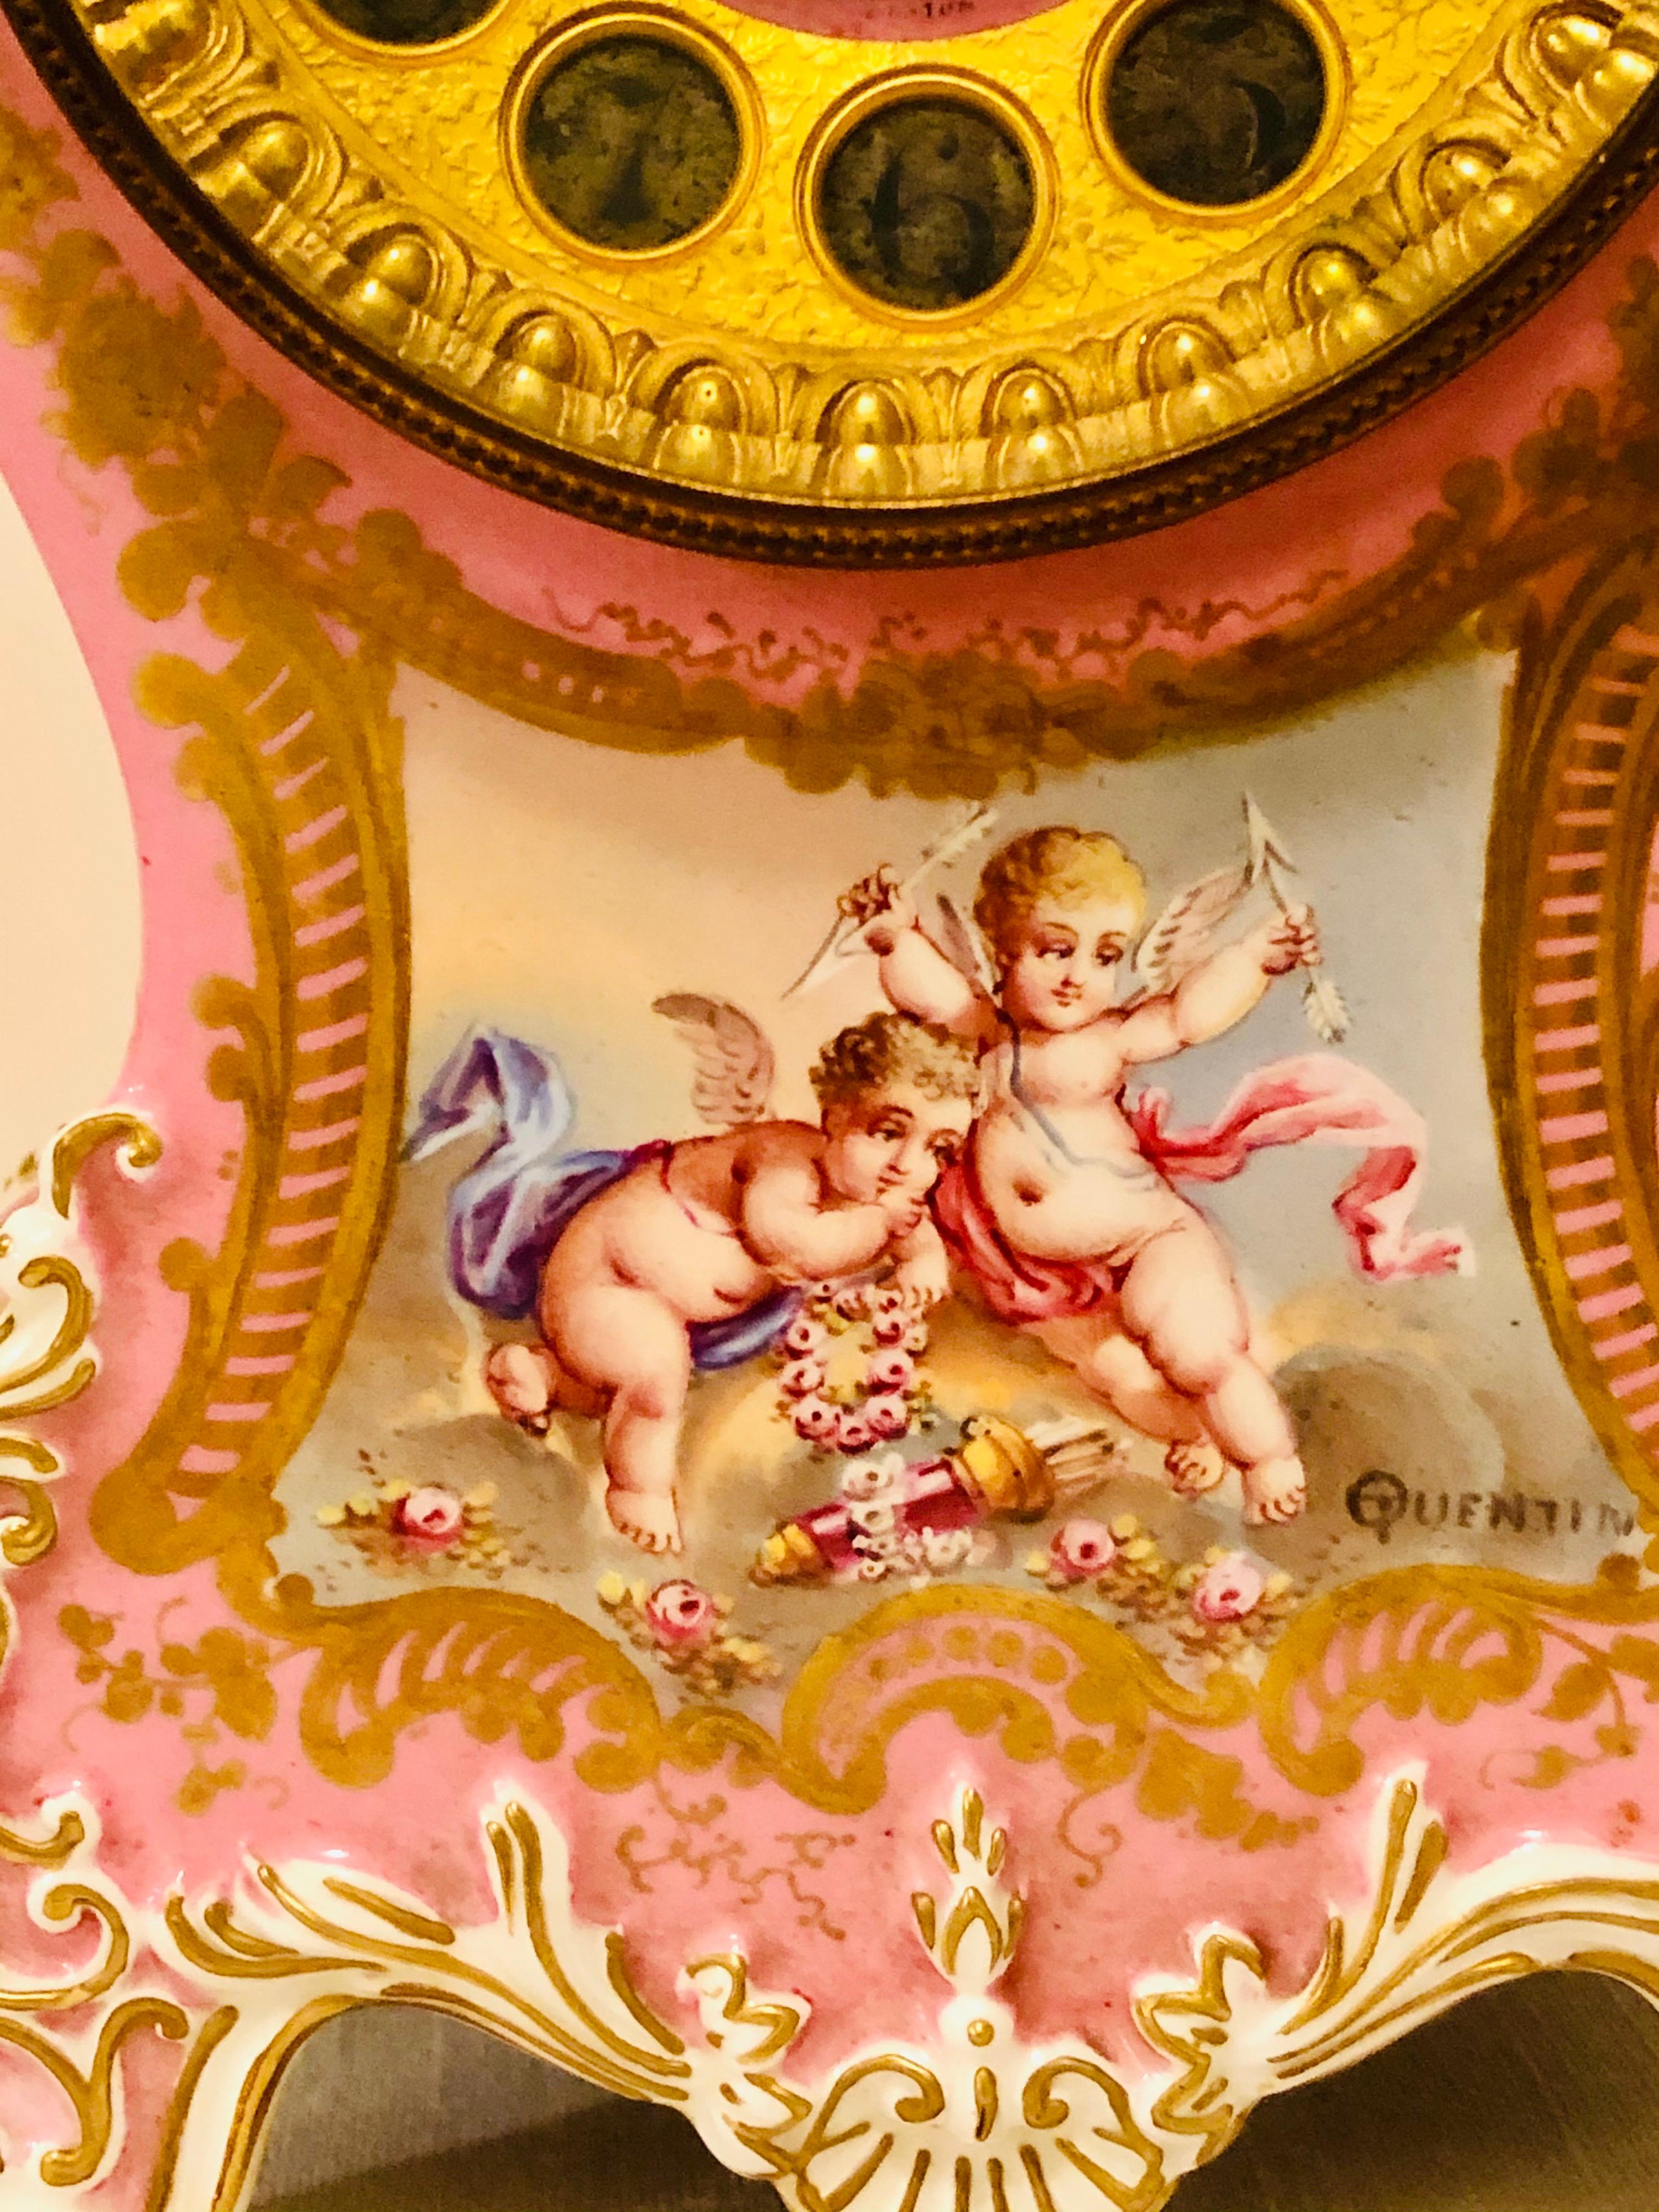 I am proud to offer you this magnificent porcelain Longwy French clock, which is painted with cherubs and artist signed Quentin. The pink pompadeur color of this fabulous mantle clock is eye-catching. The beautiful paintings of the cherubs with